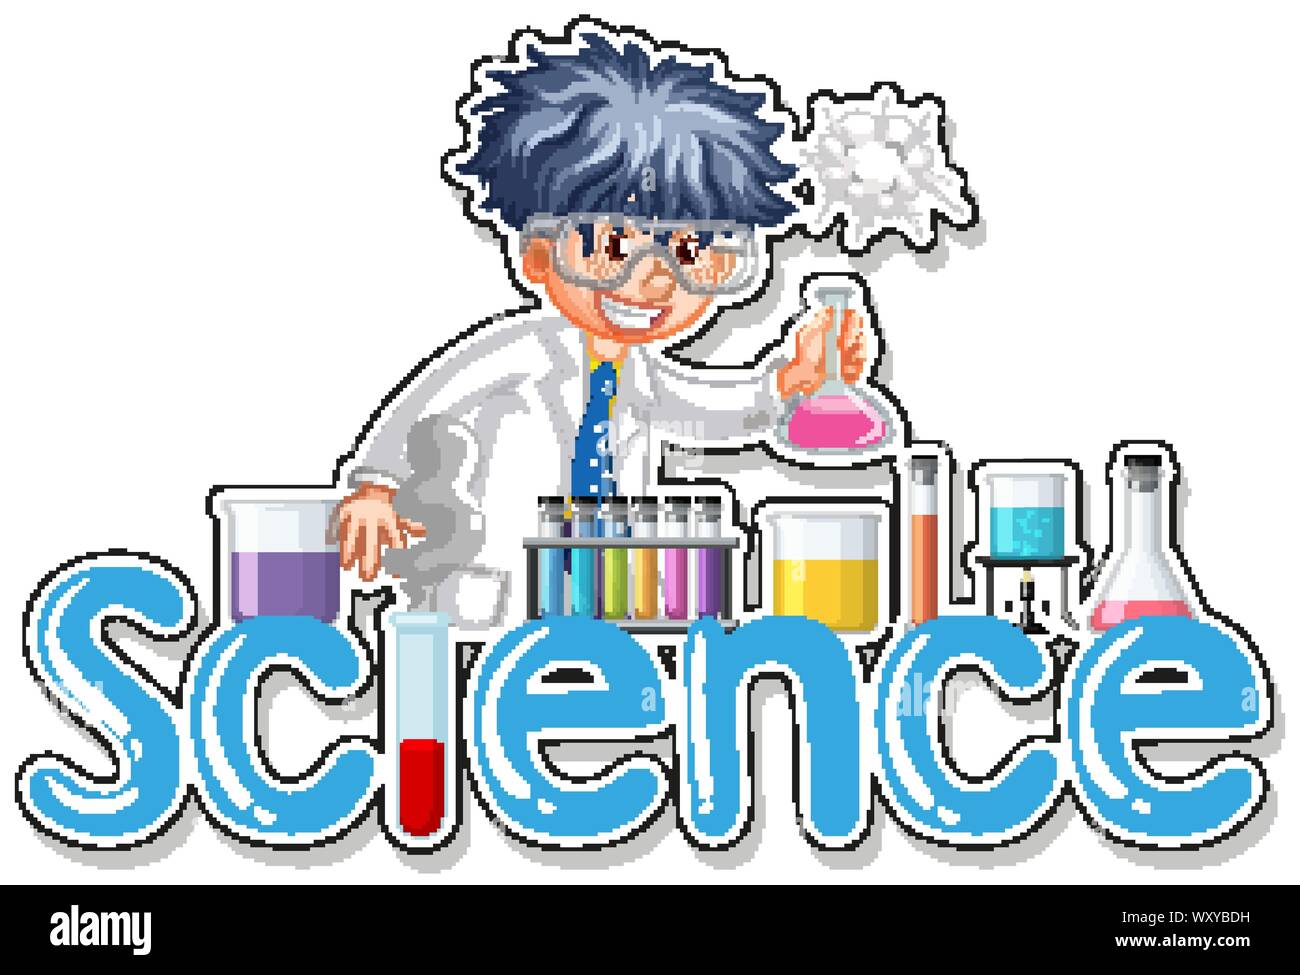 Sticker design with scientist doing experiment illustration Stock Vector